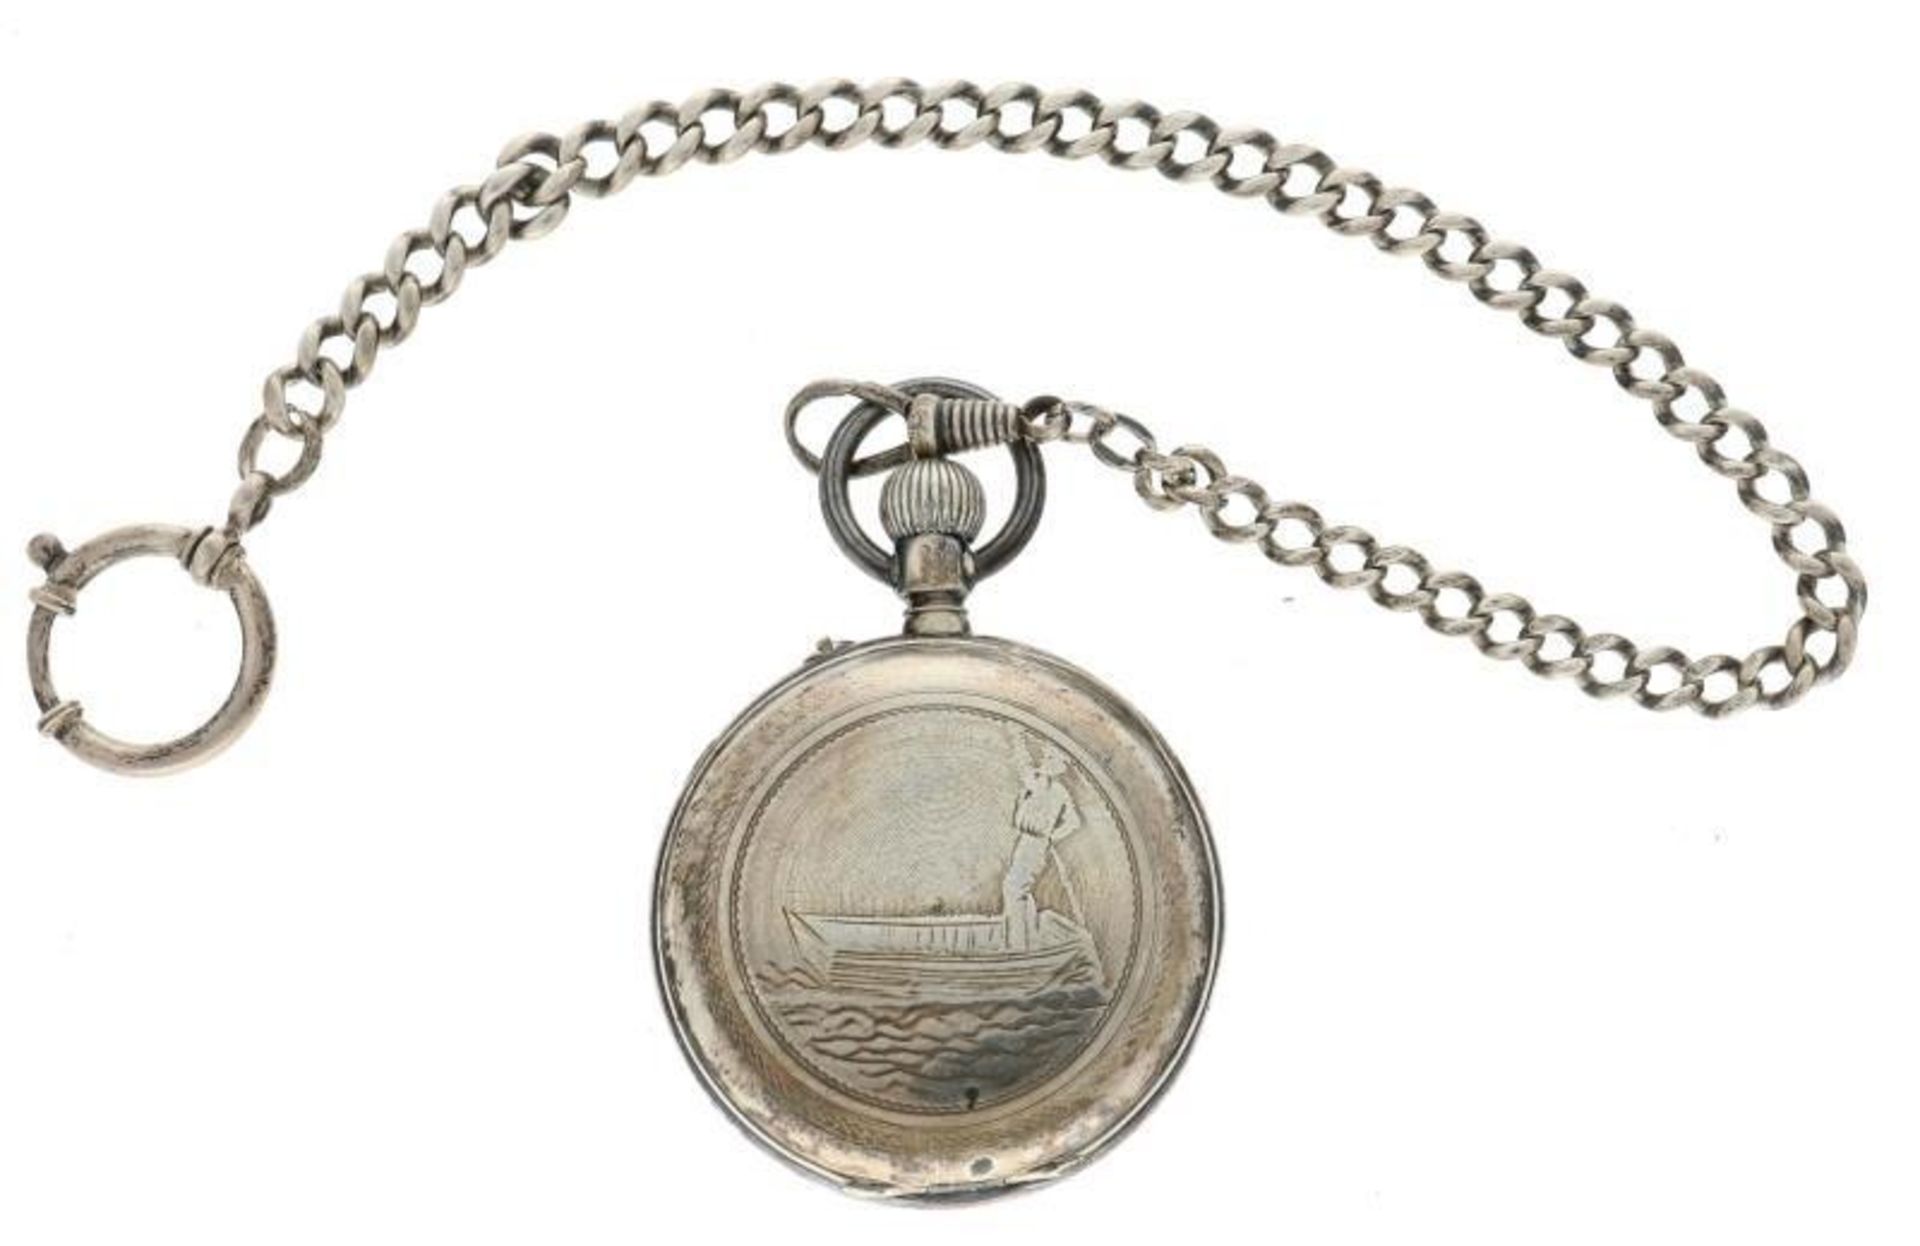 Silver pocketwatch - Men's Pocketwatch - Manual winding - Ca. 1901. - Image 2 of 5